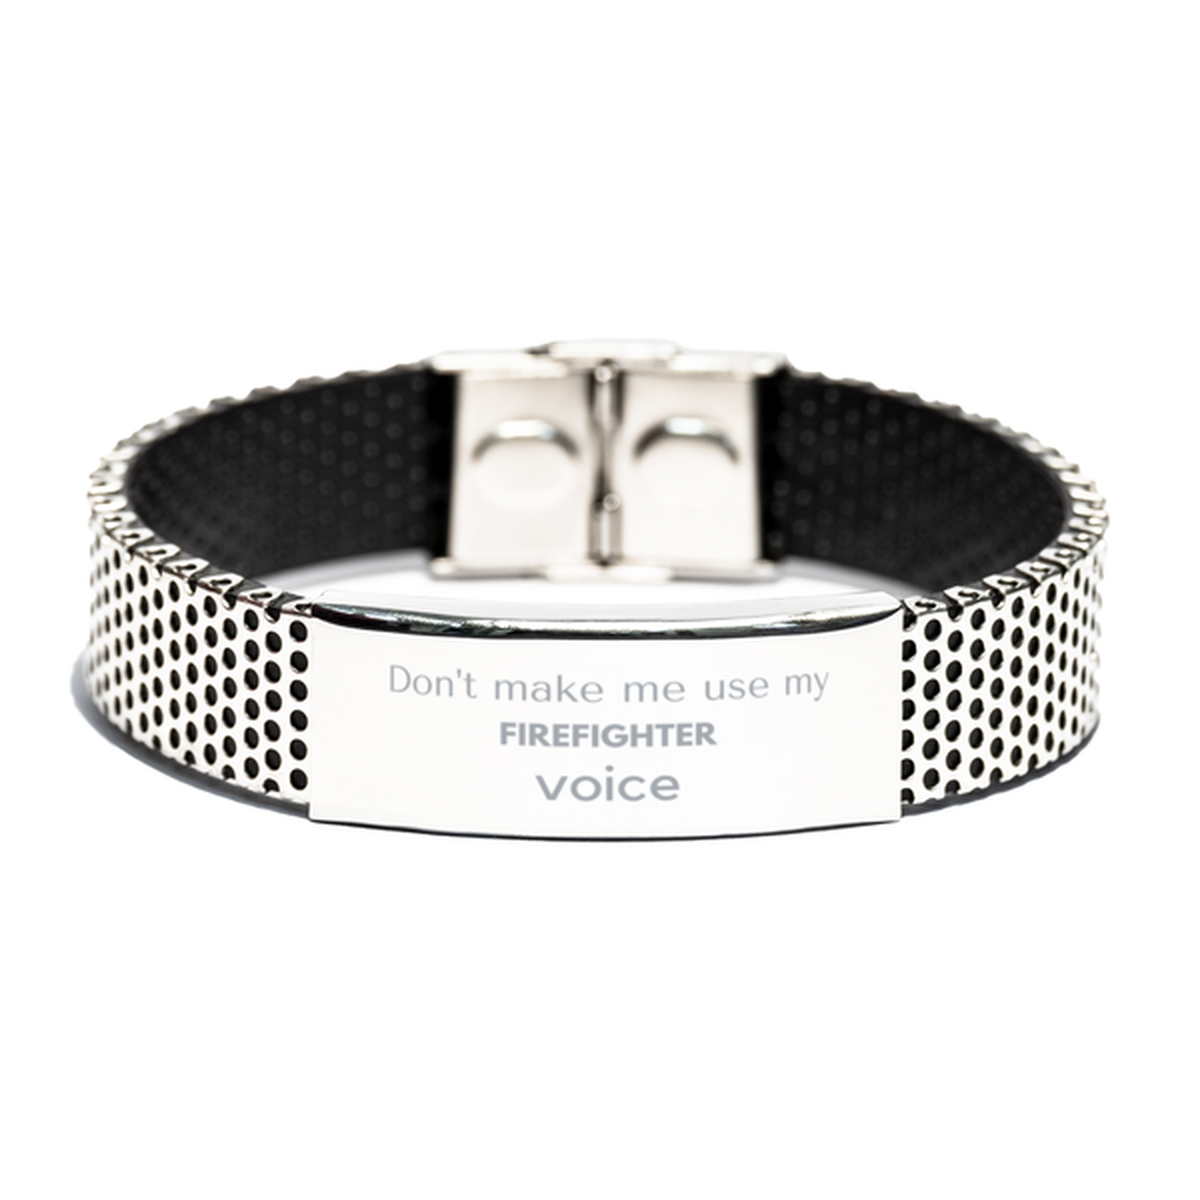 Don't make me use my Firefighter voice, Sarcasm Firefighter Gifts, Christmas Firefighter Stainless Steel Bracelet Birthday Unique Gifts For Firefighter Coworkers, Men, Women, Colleague, Friends